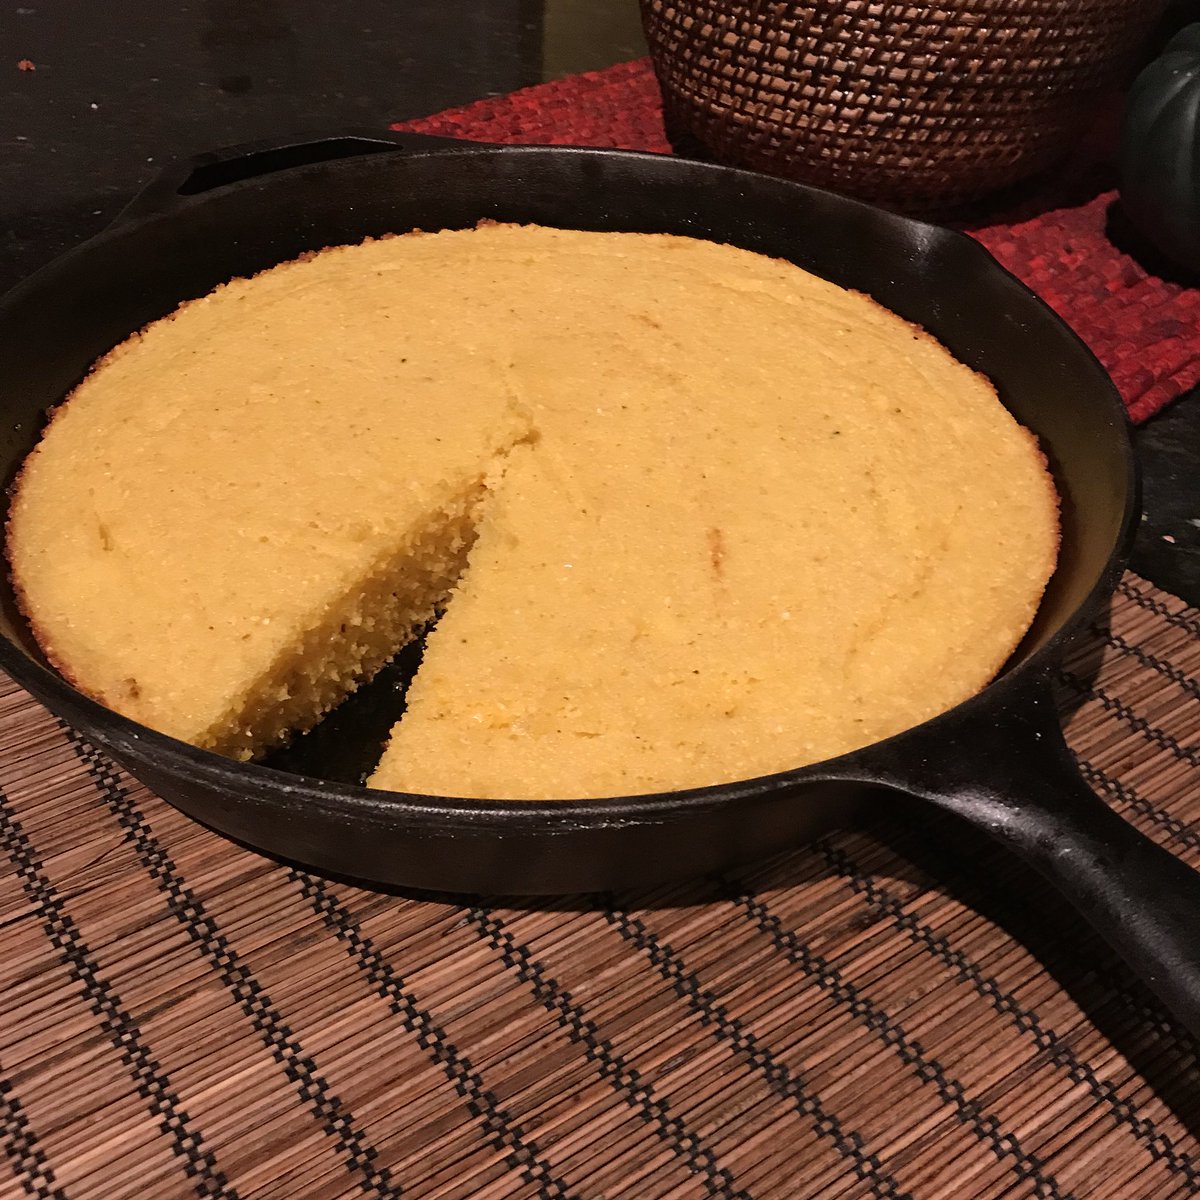 Bread #2: Southern-style skillet cornbread. I make cornbread a lot but I find many recipes to be too dry or too murderously full of butter. This one has a great texture though it could do with more flavor based on preference (paprika, sugar, sage etc)